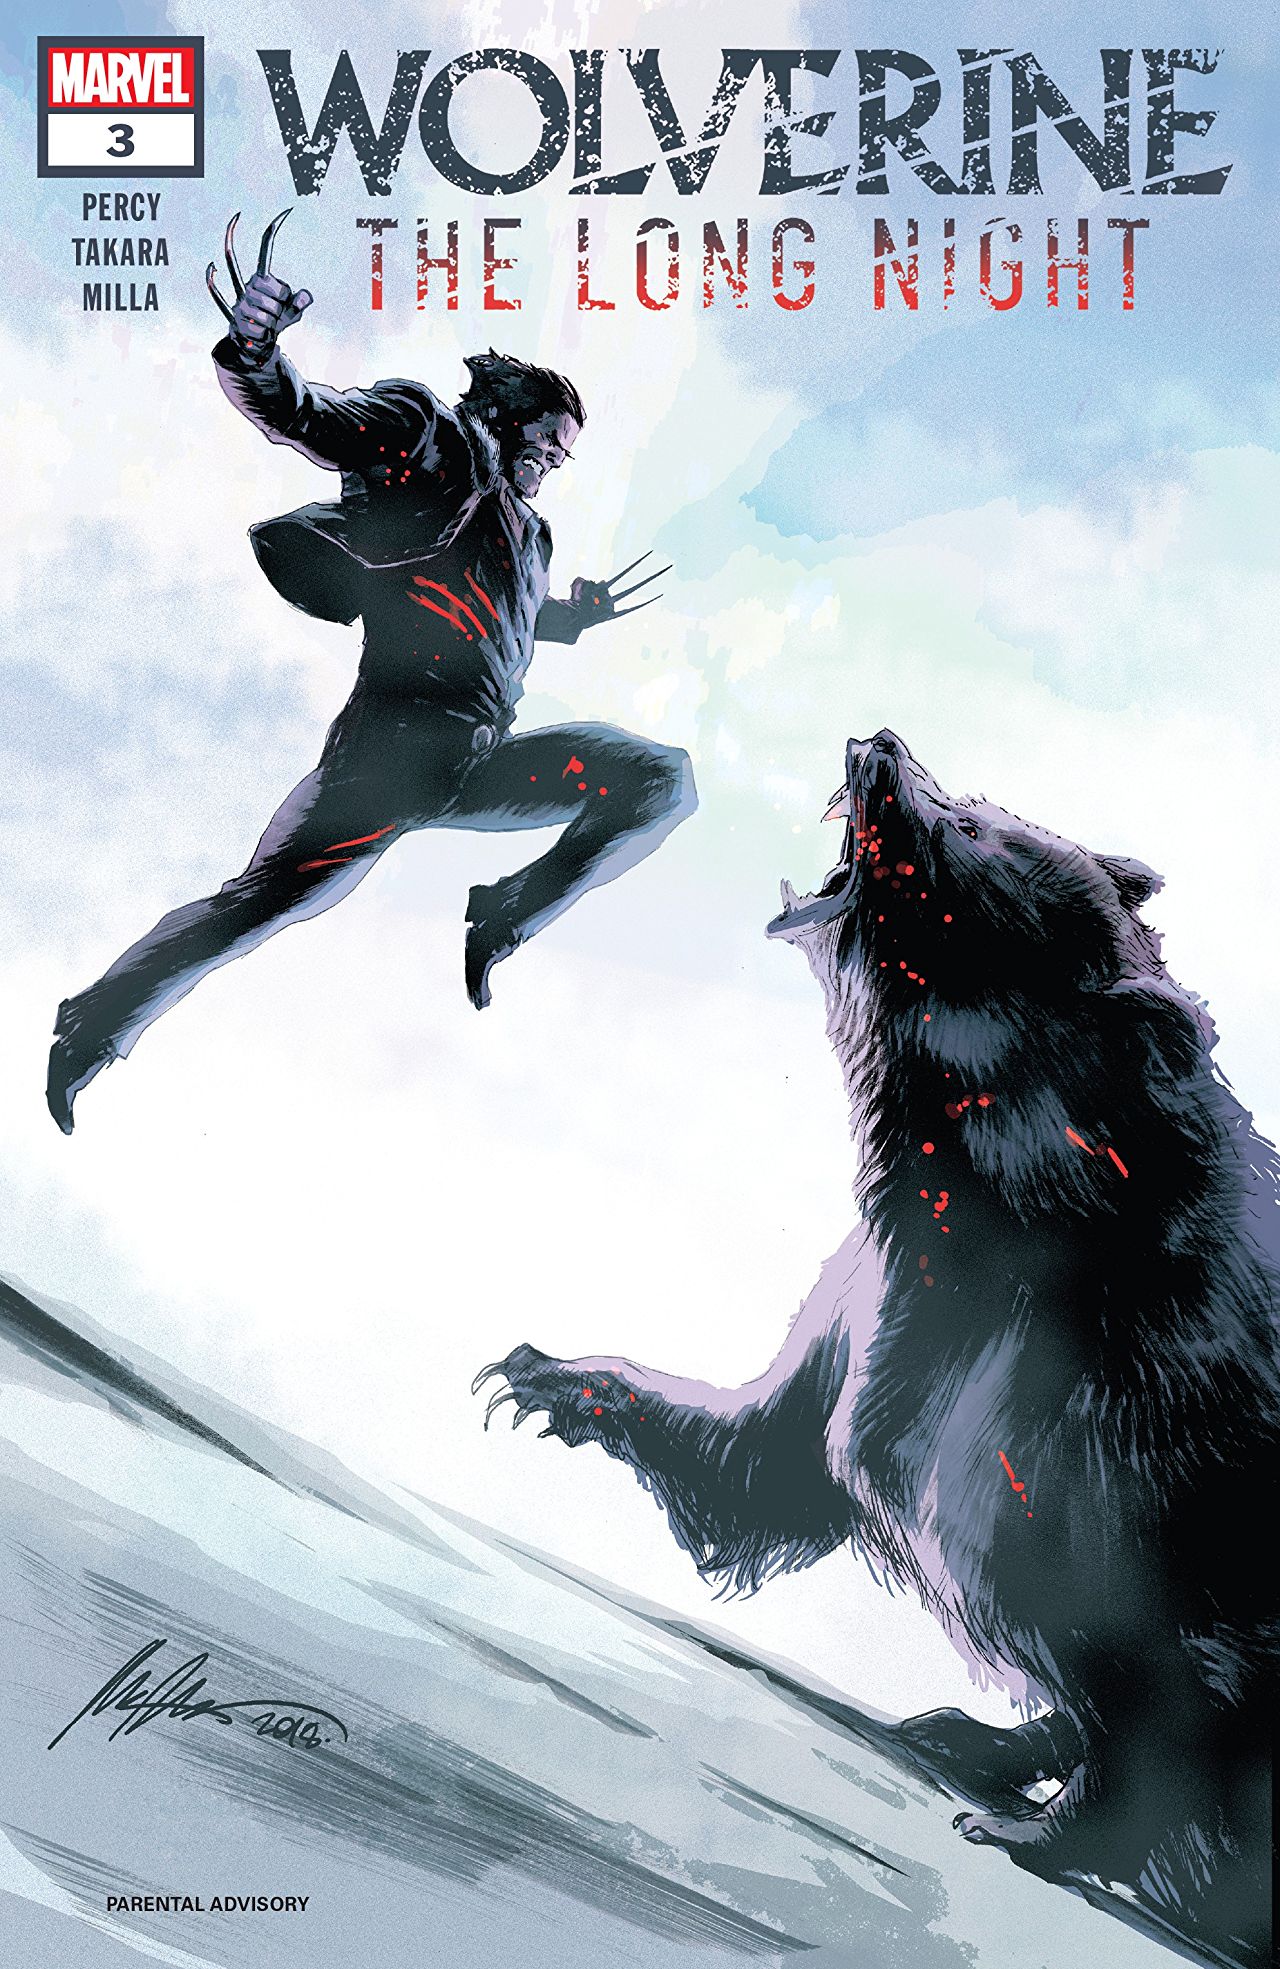 Marvel Preview: Wolverine: The Long Night #3